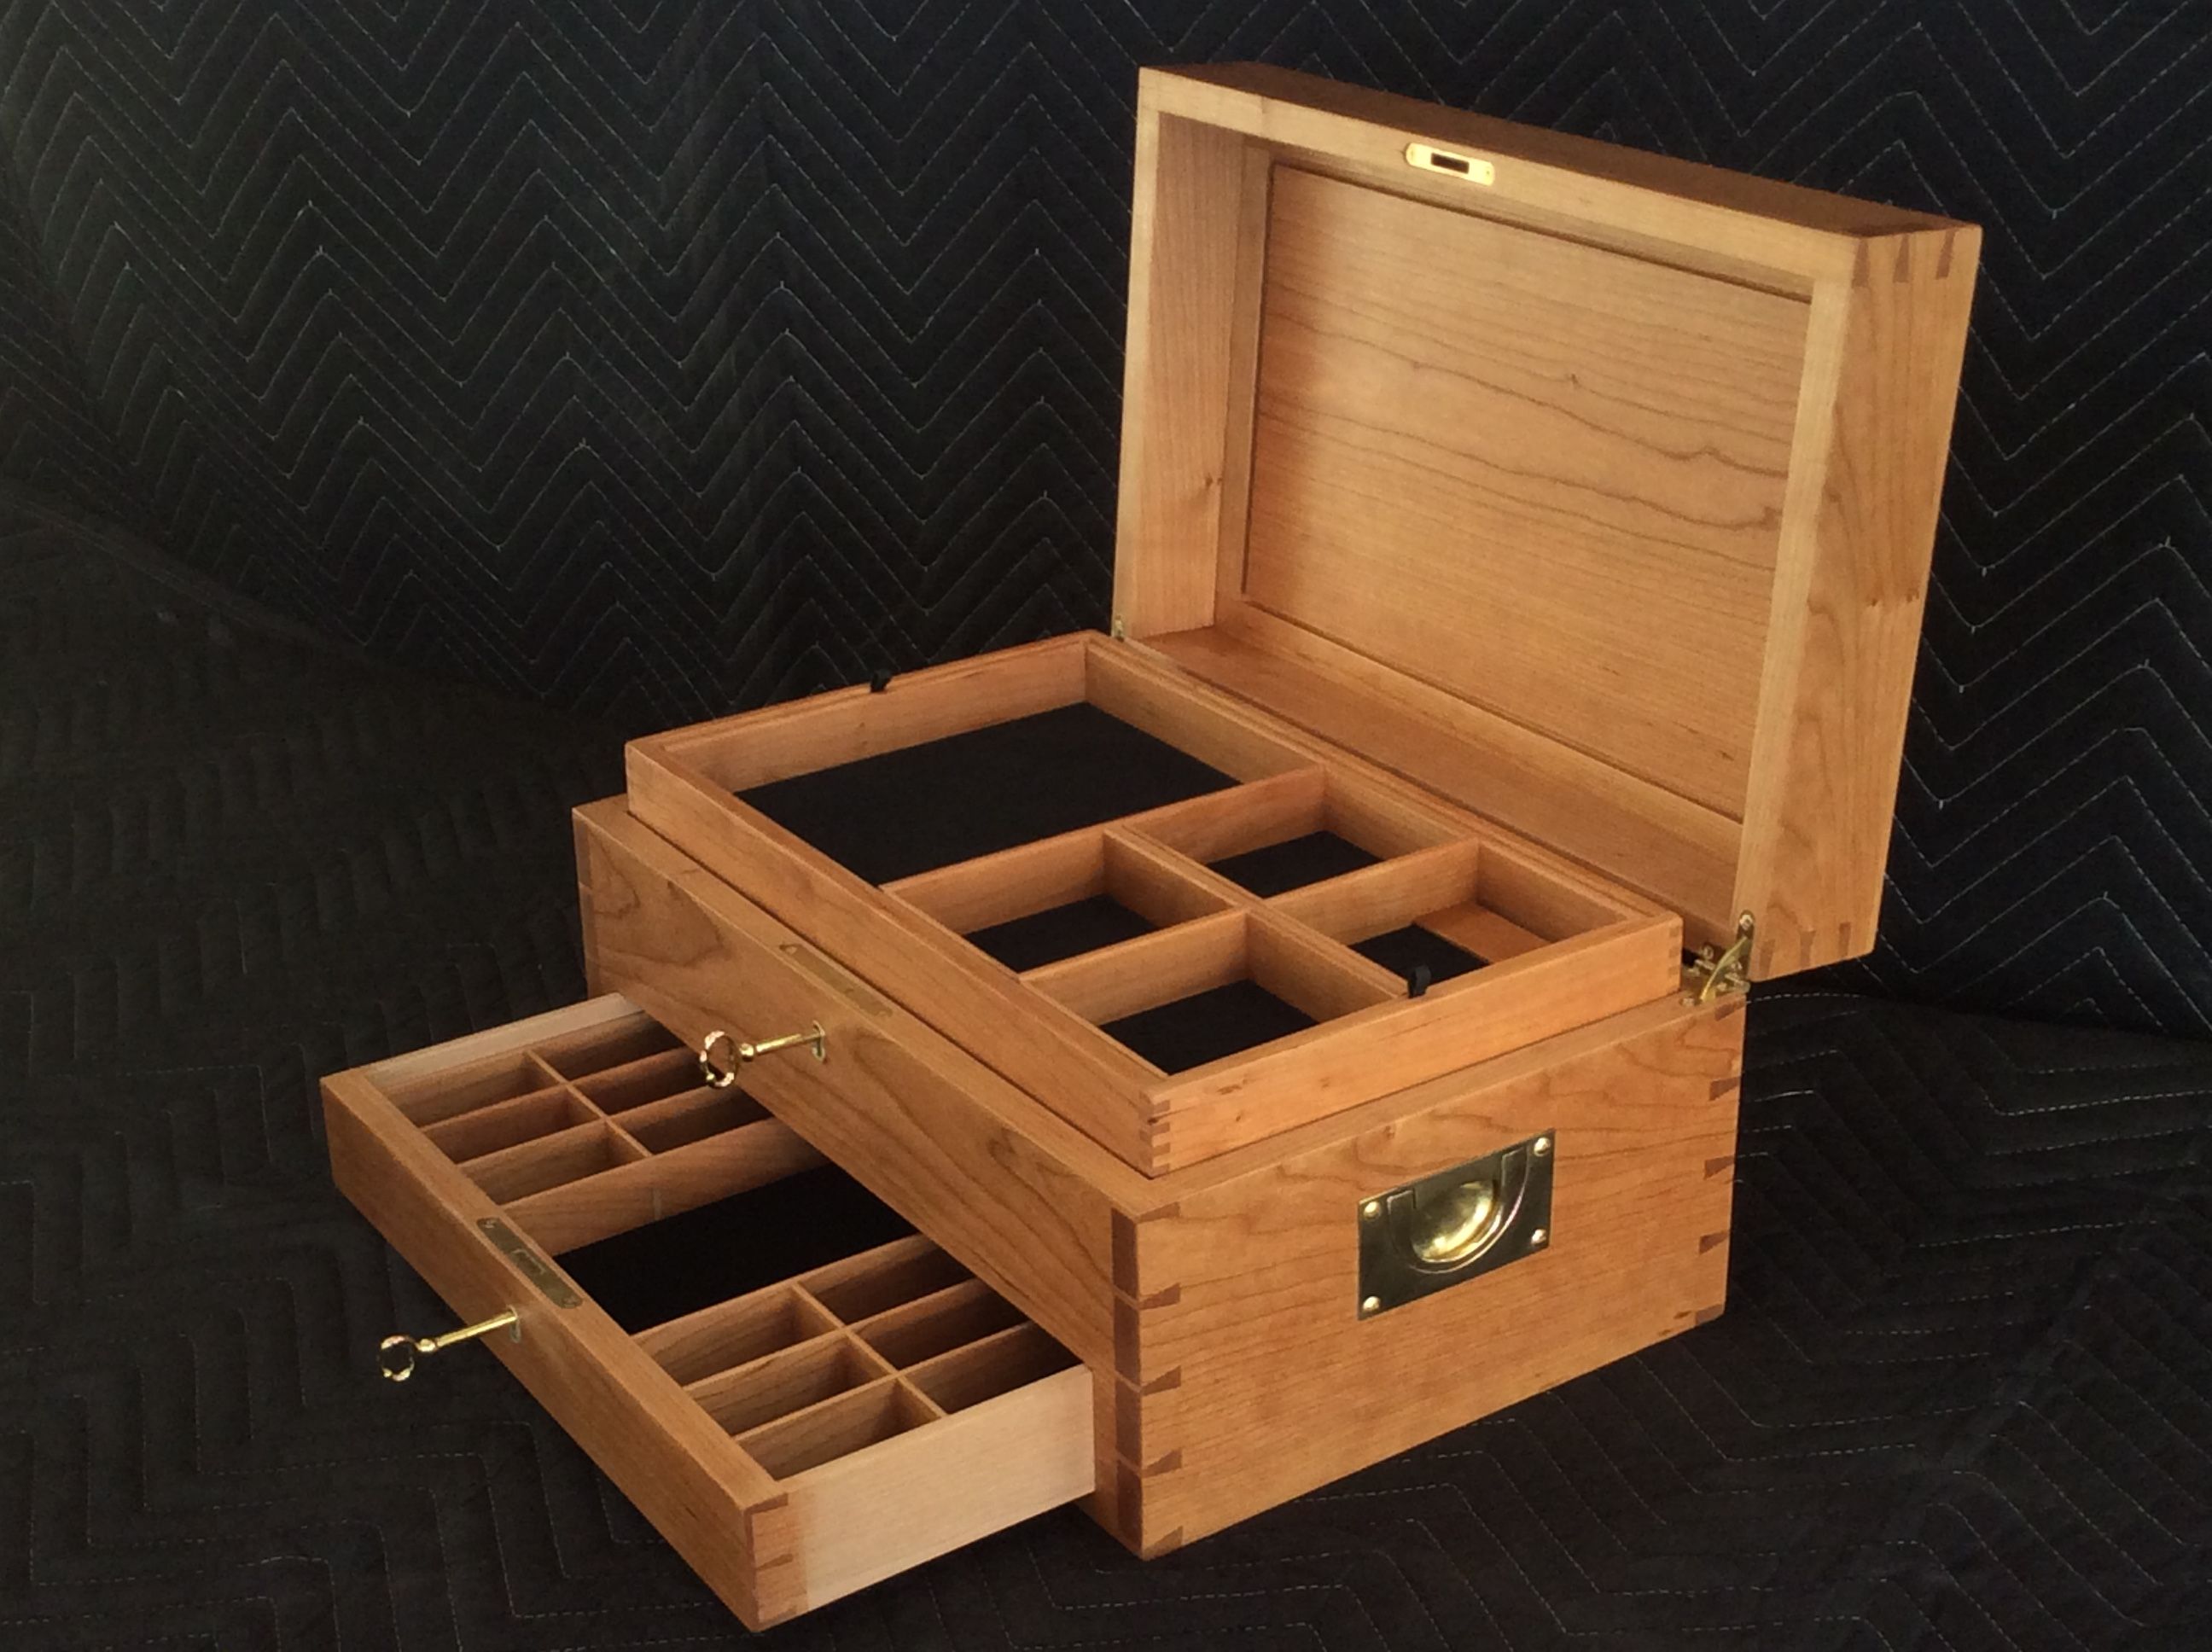 Buy Handmade Large Box With Drawer, made to order from David Klenk